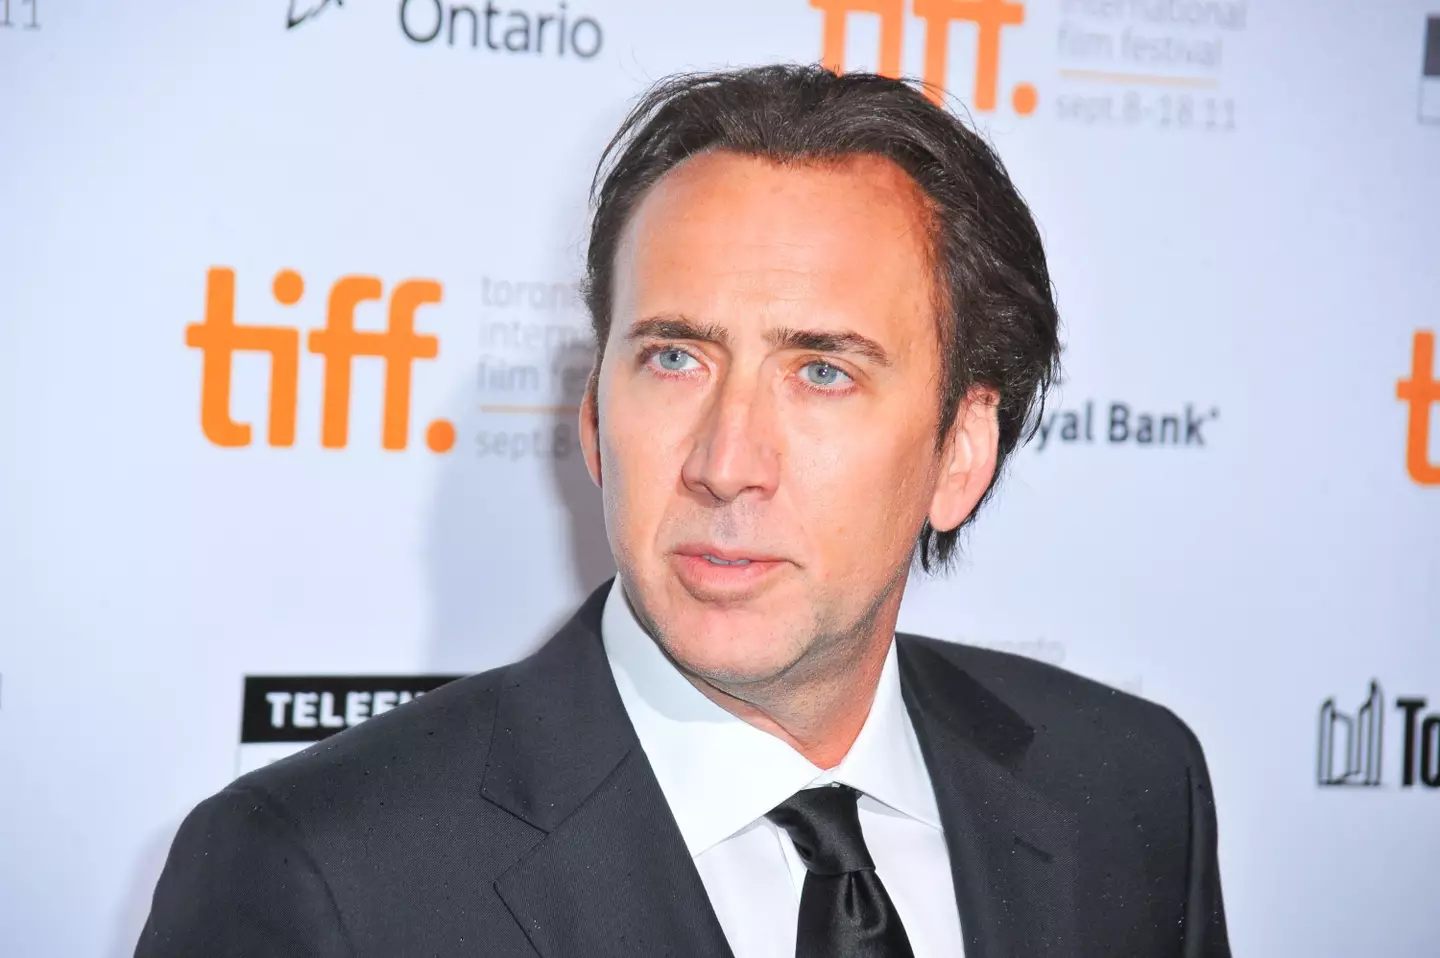 Cage has starred in more than 100 films over his career.